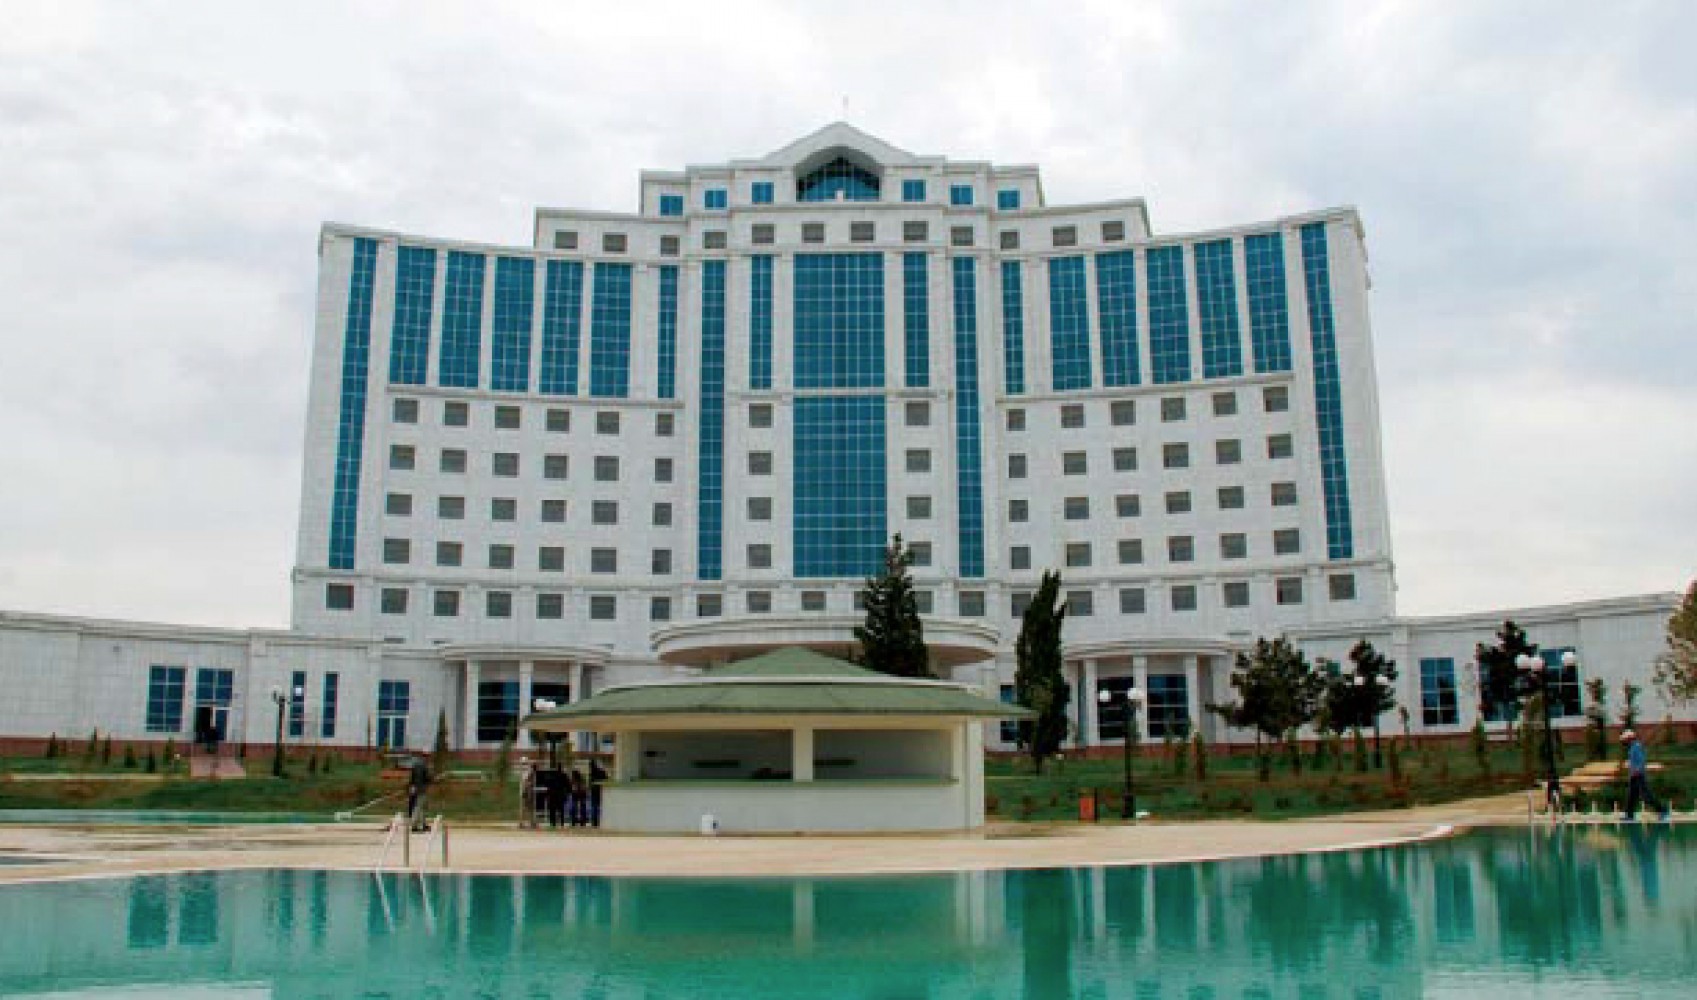 HOTEL AND HEALTH CENTER OF TURKMENISTAN MINISTRY OF DEFENSE